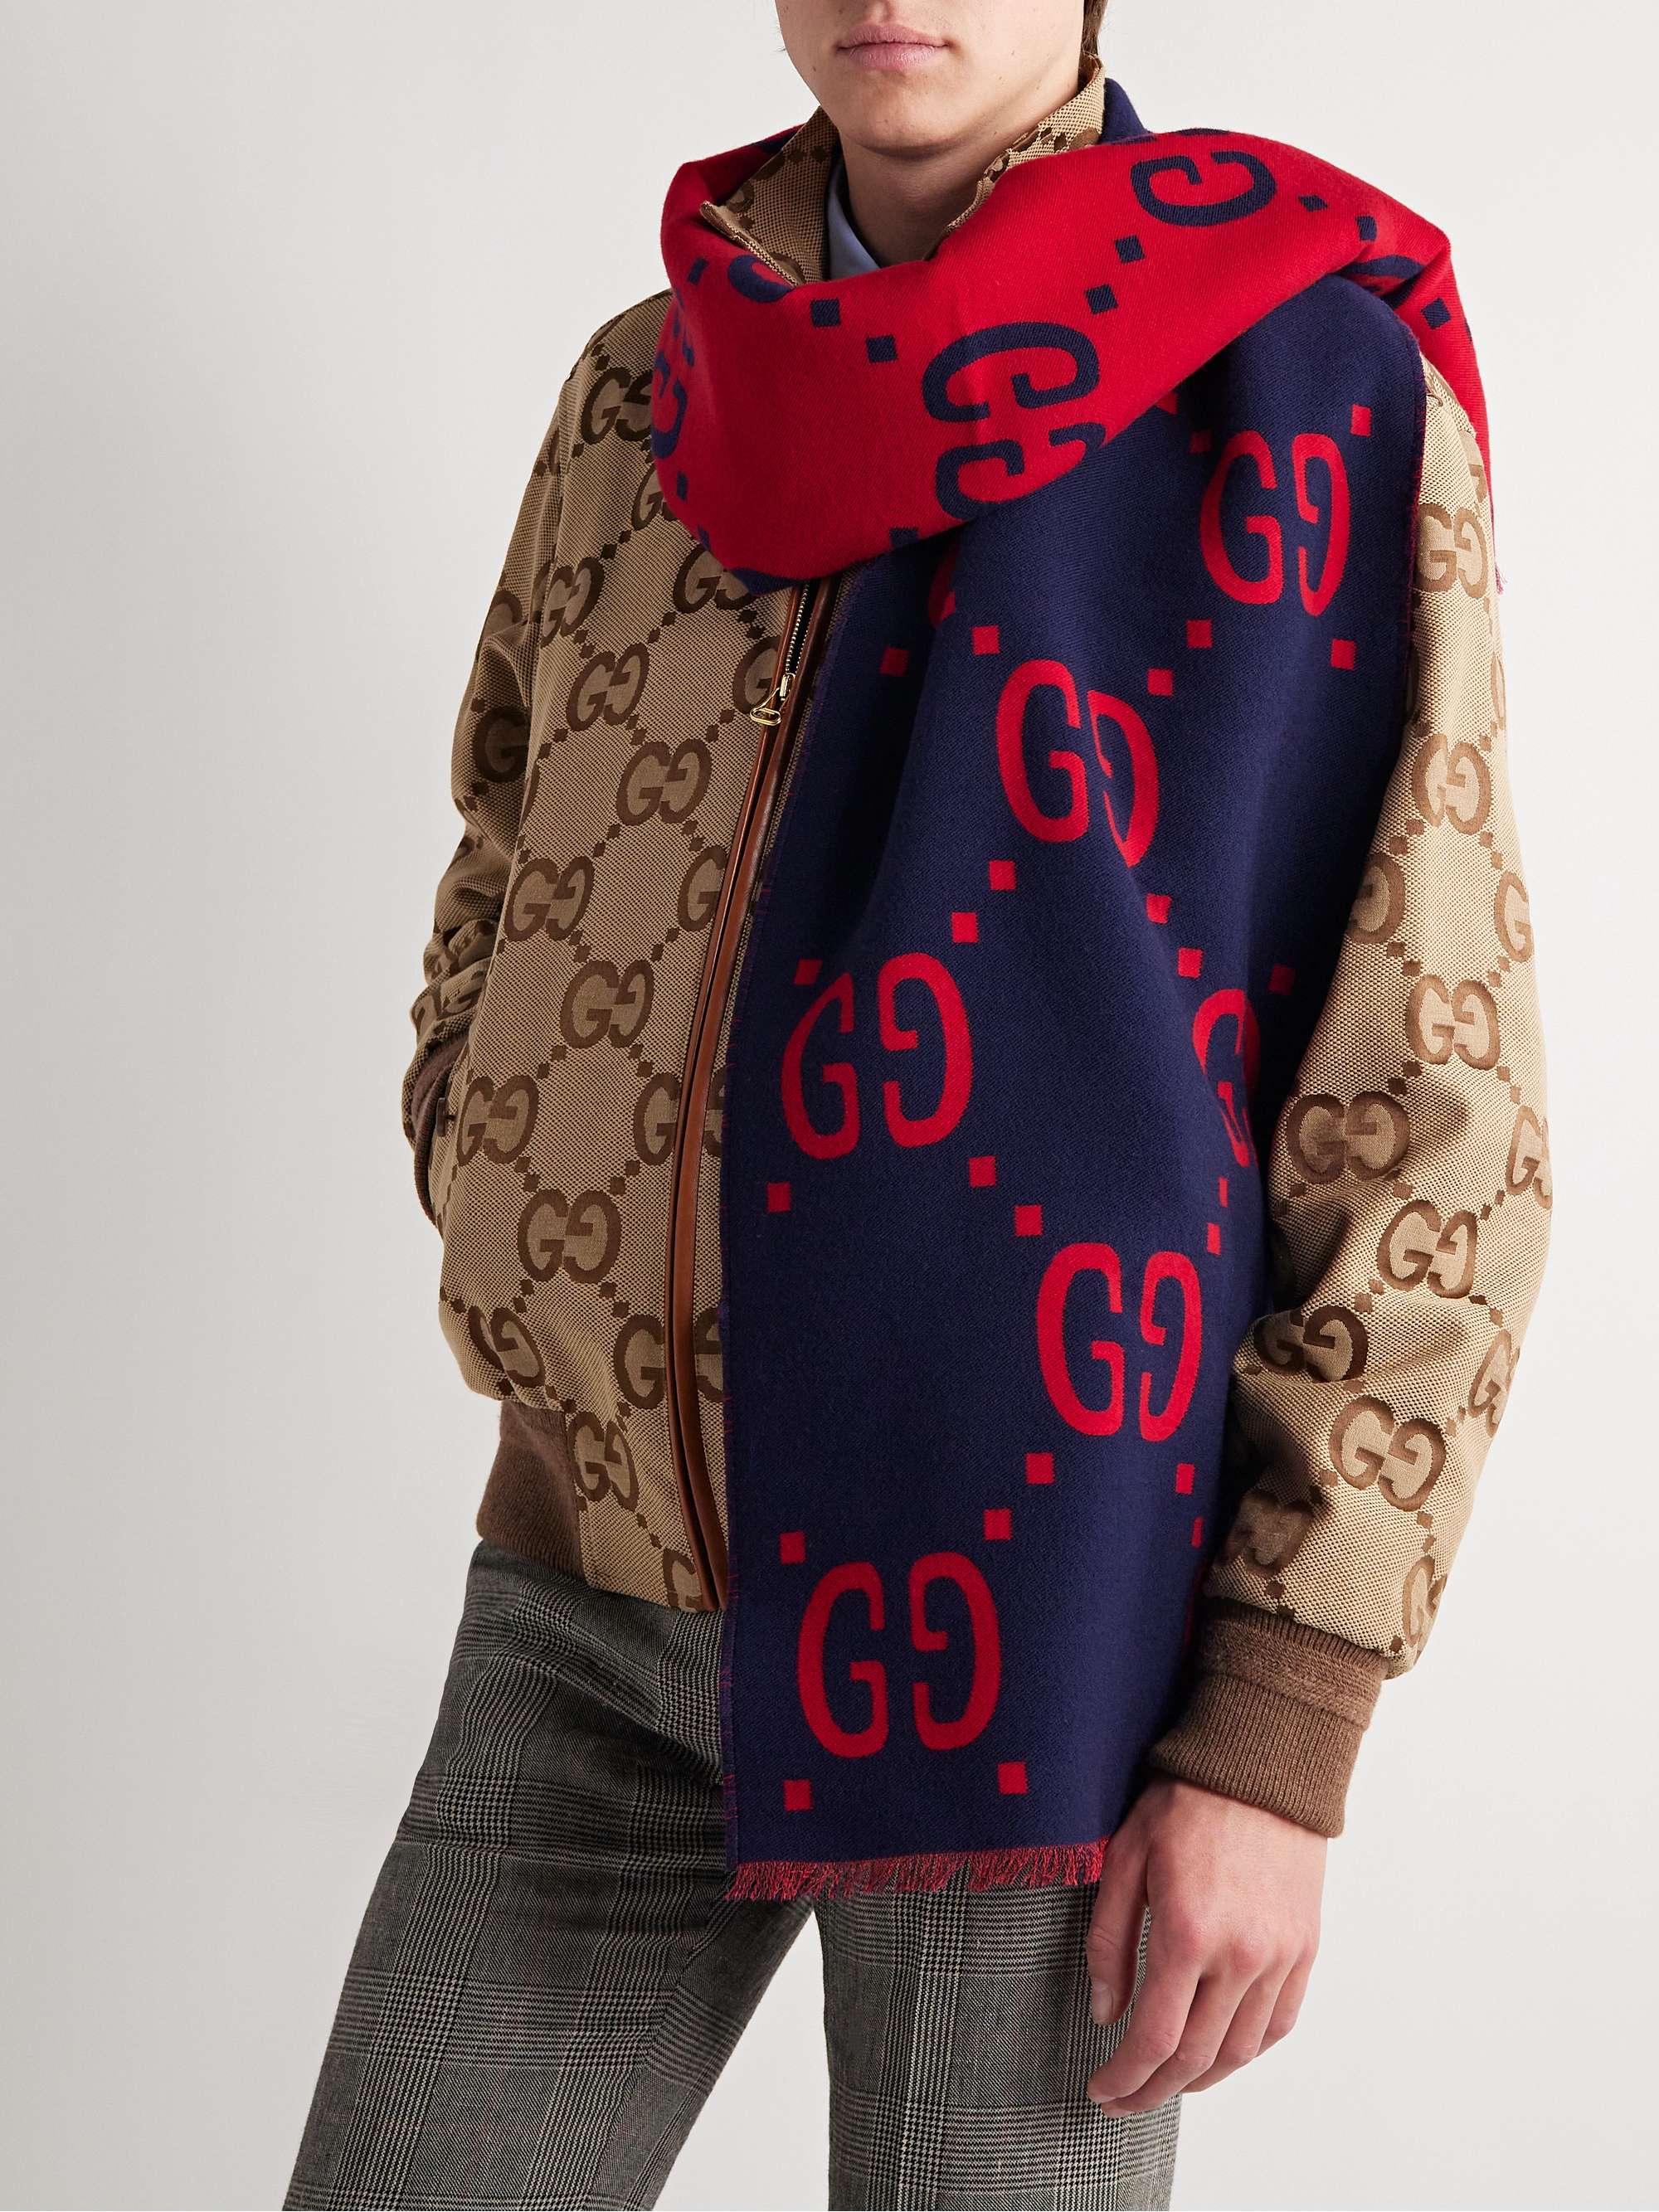 GUCCI Fringed Logo-Jacquard Wool and Silk-Blend Scarf for Men